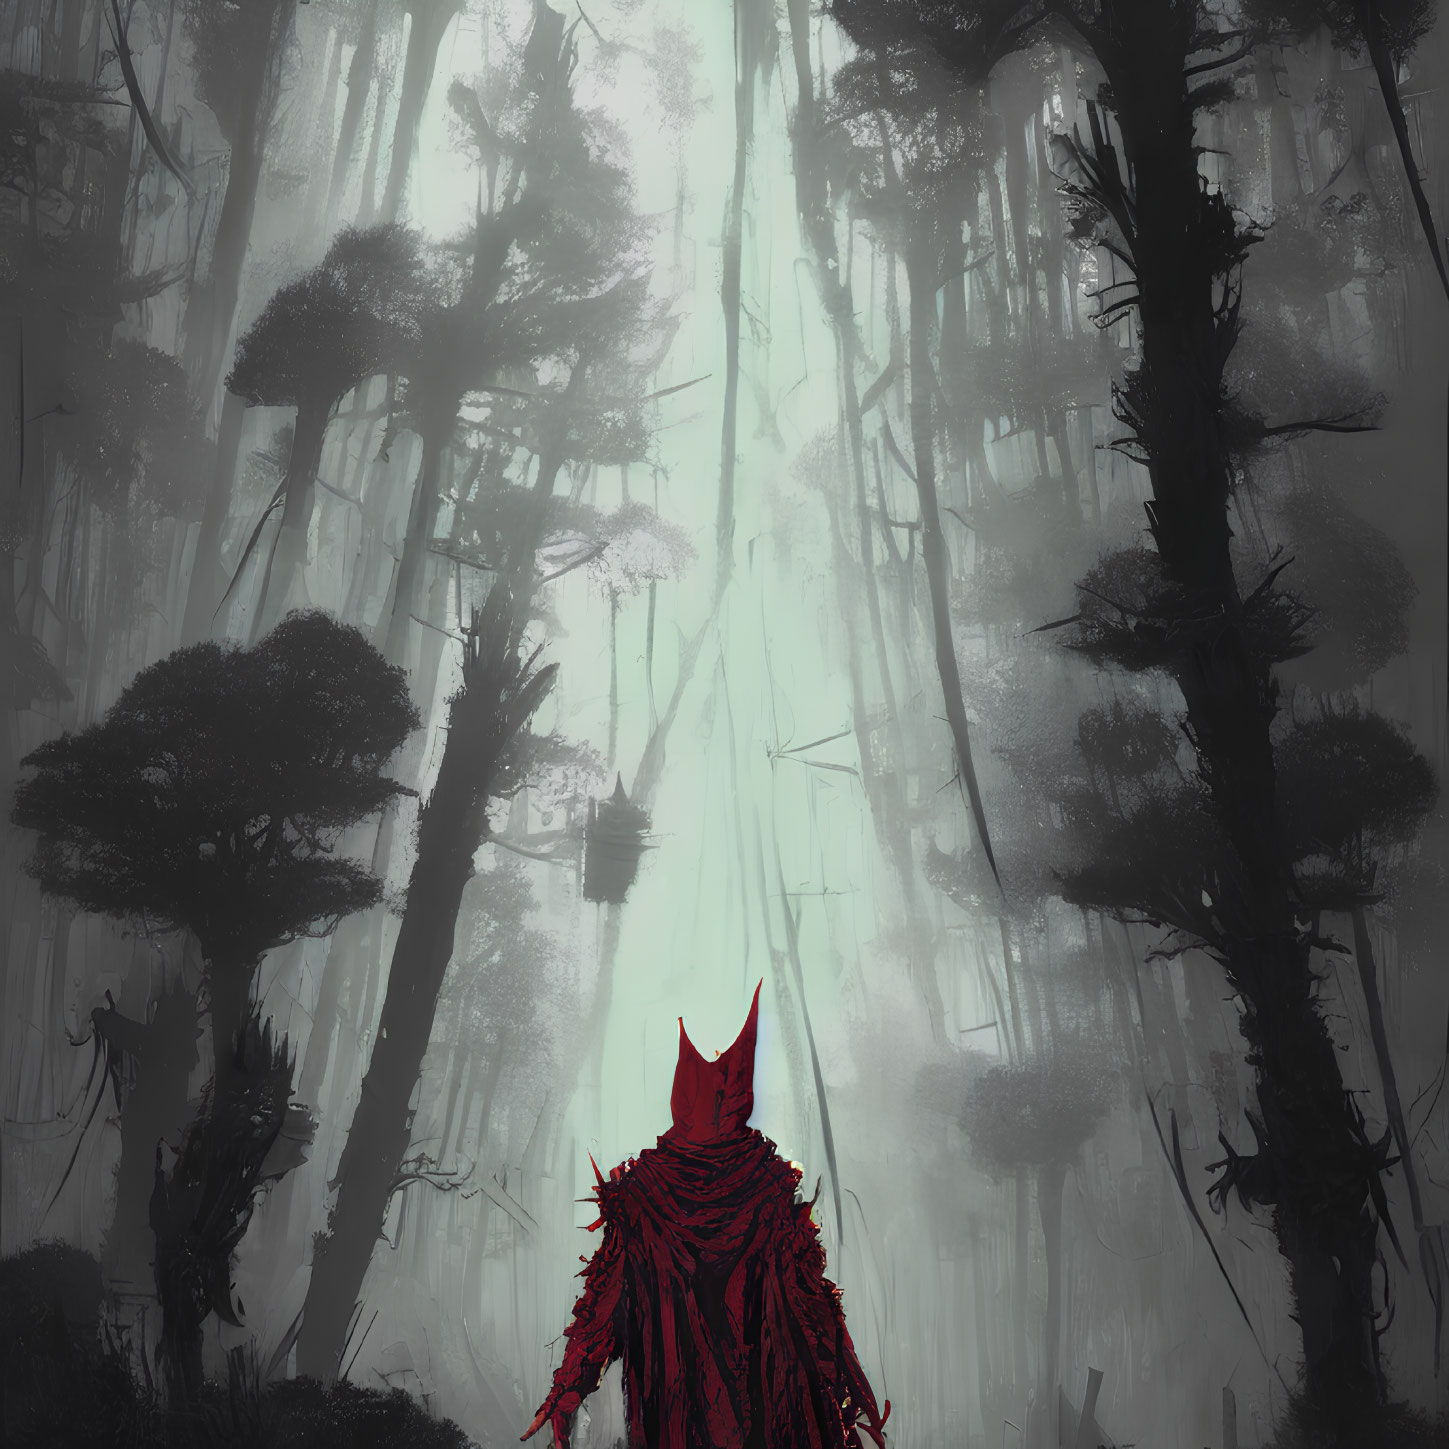 Misty forest scene with cloaked figure and towering trees